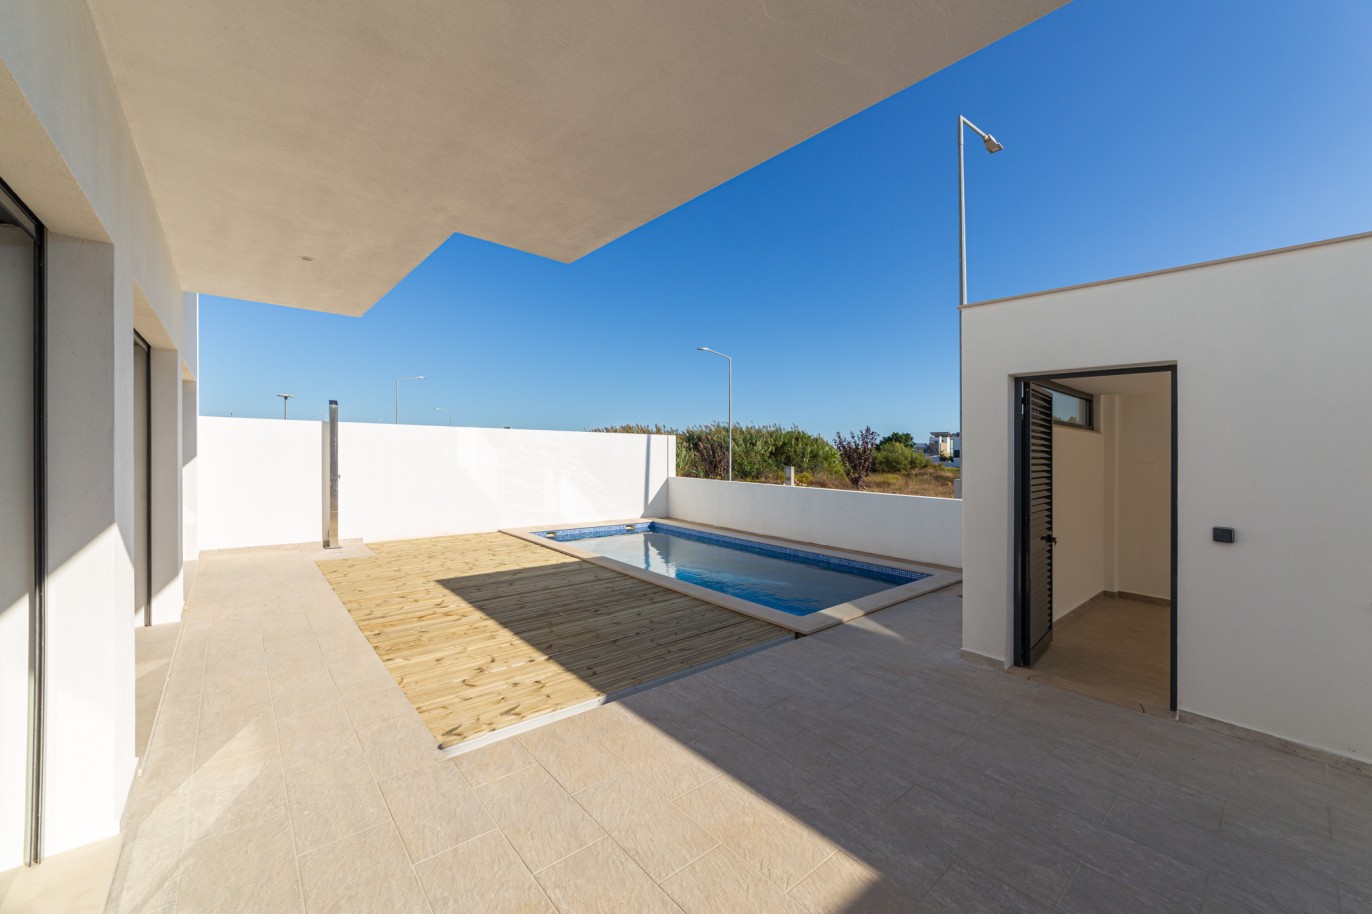 3 bedroom villa with pool and sea view, for sale in Tavira, Algarve_225841